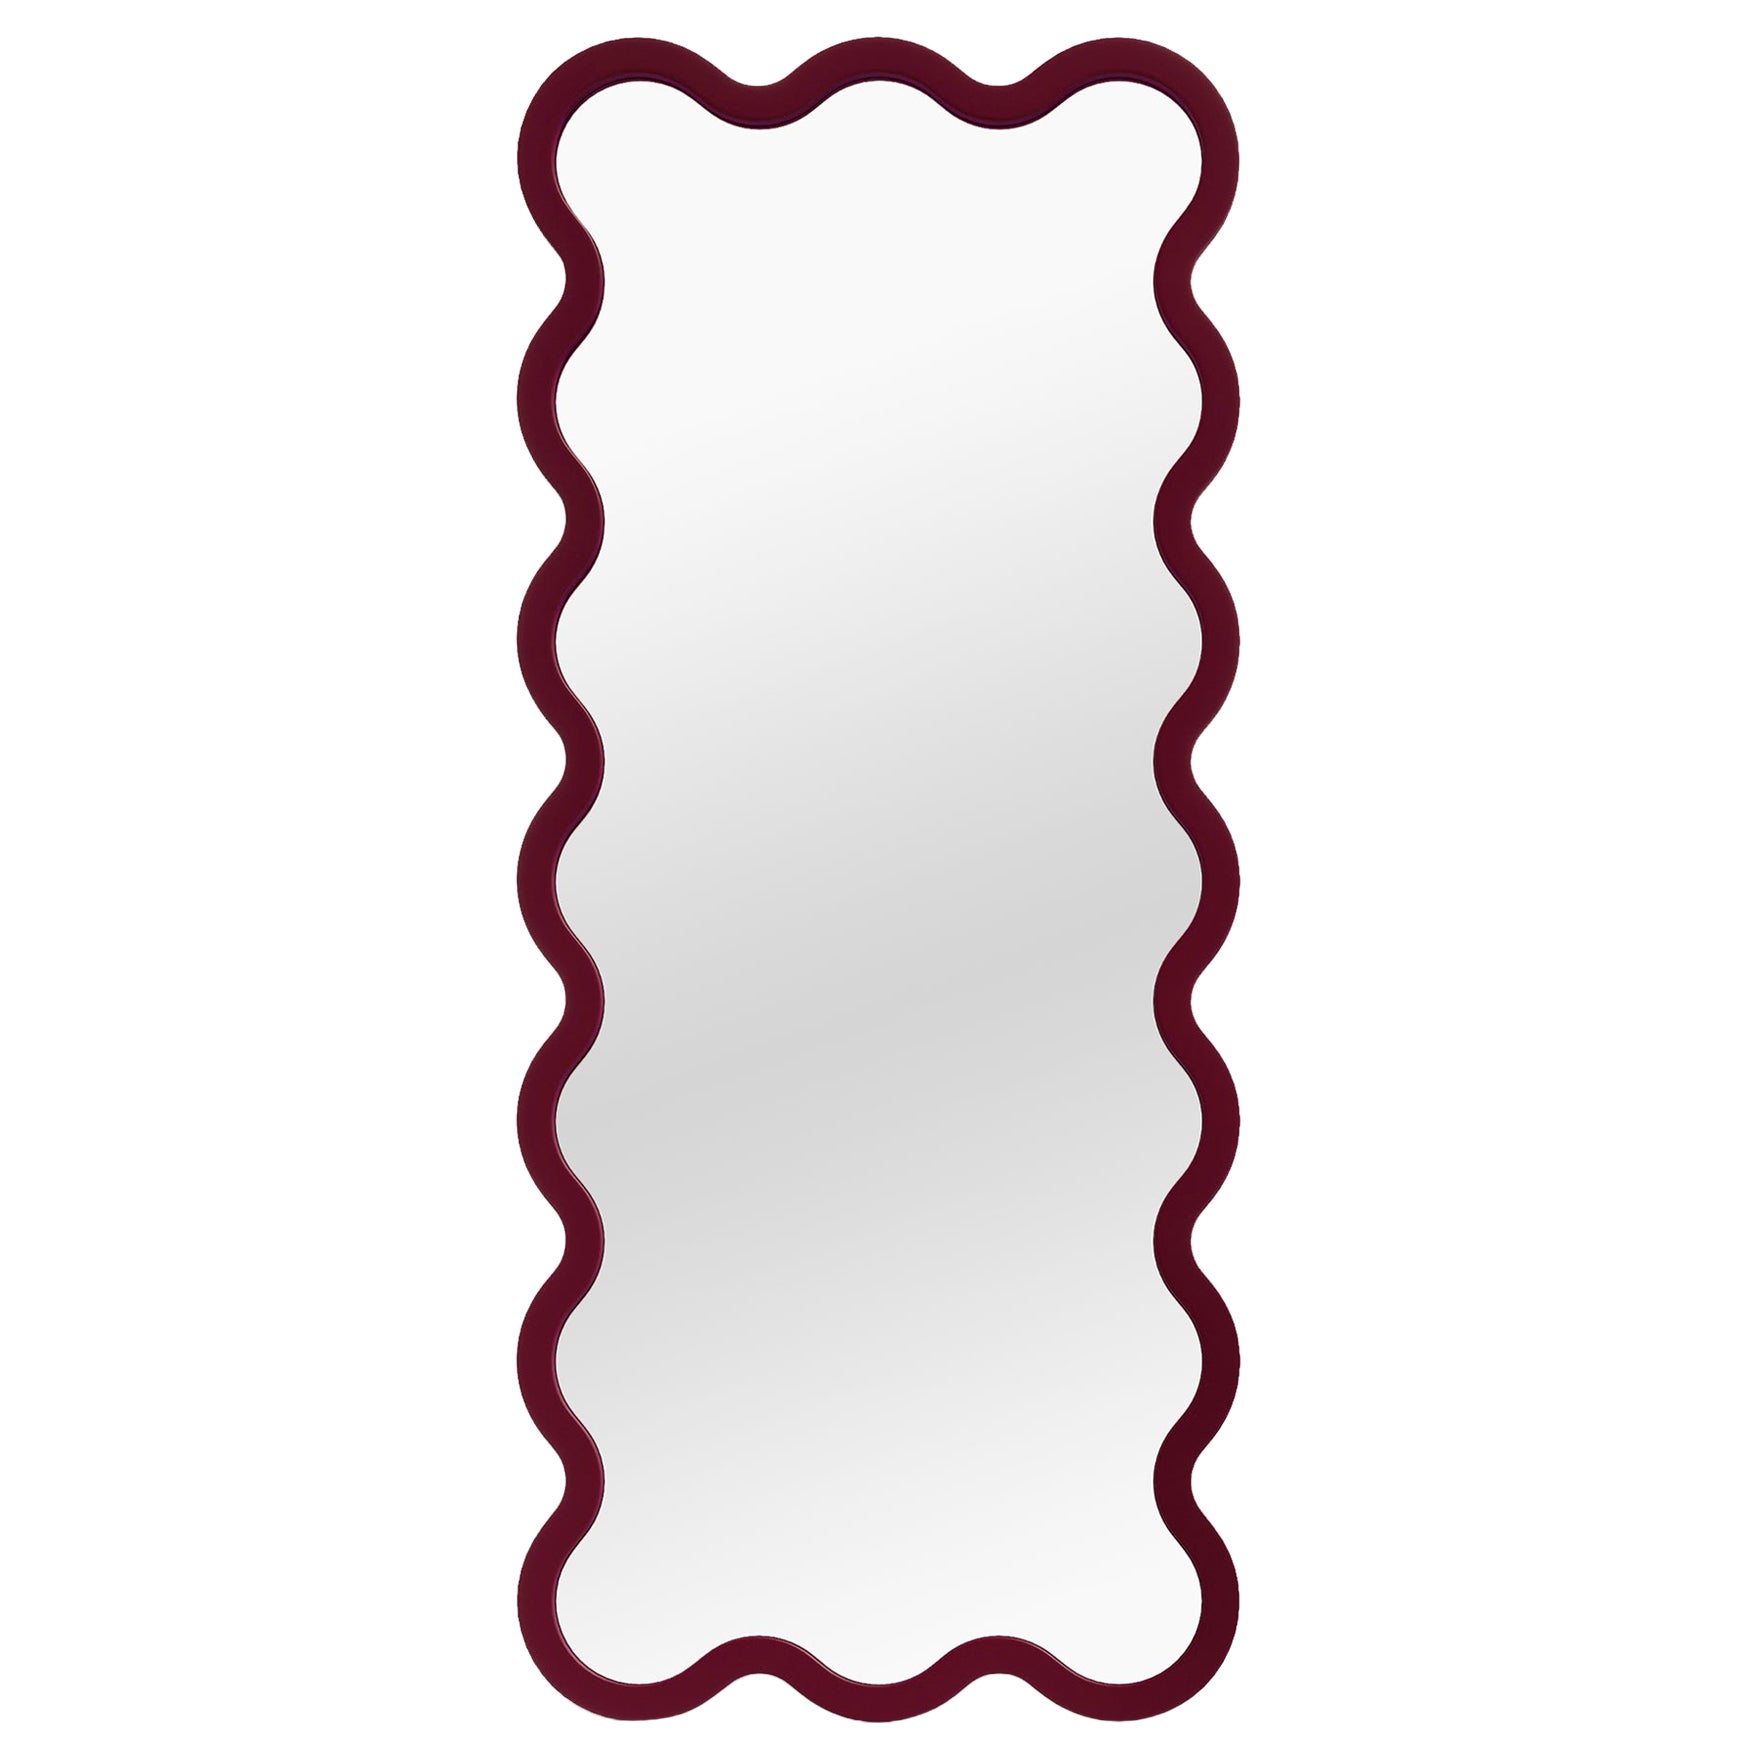 Contemporary Mirror 'Hvyli 16' by Oitoproducts, Dark Red Frame